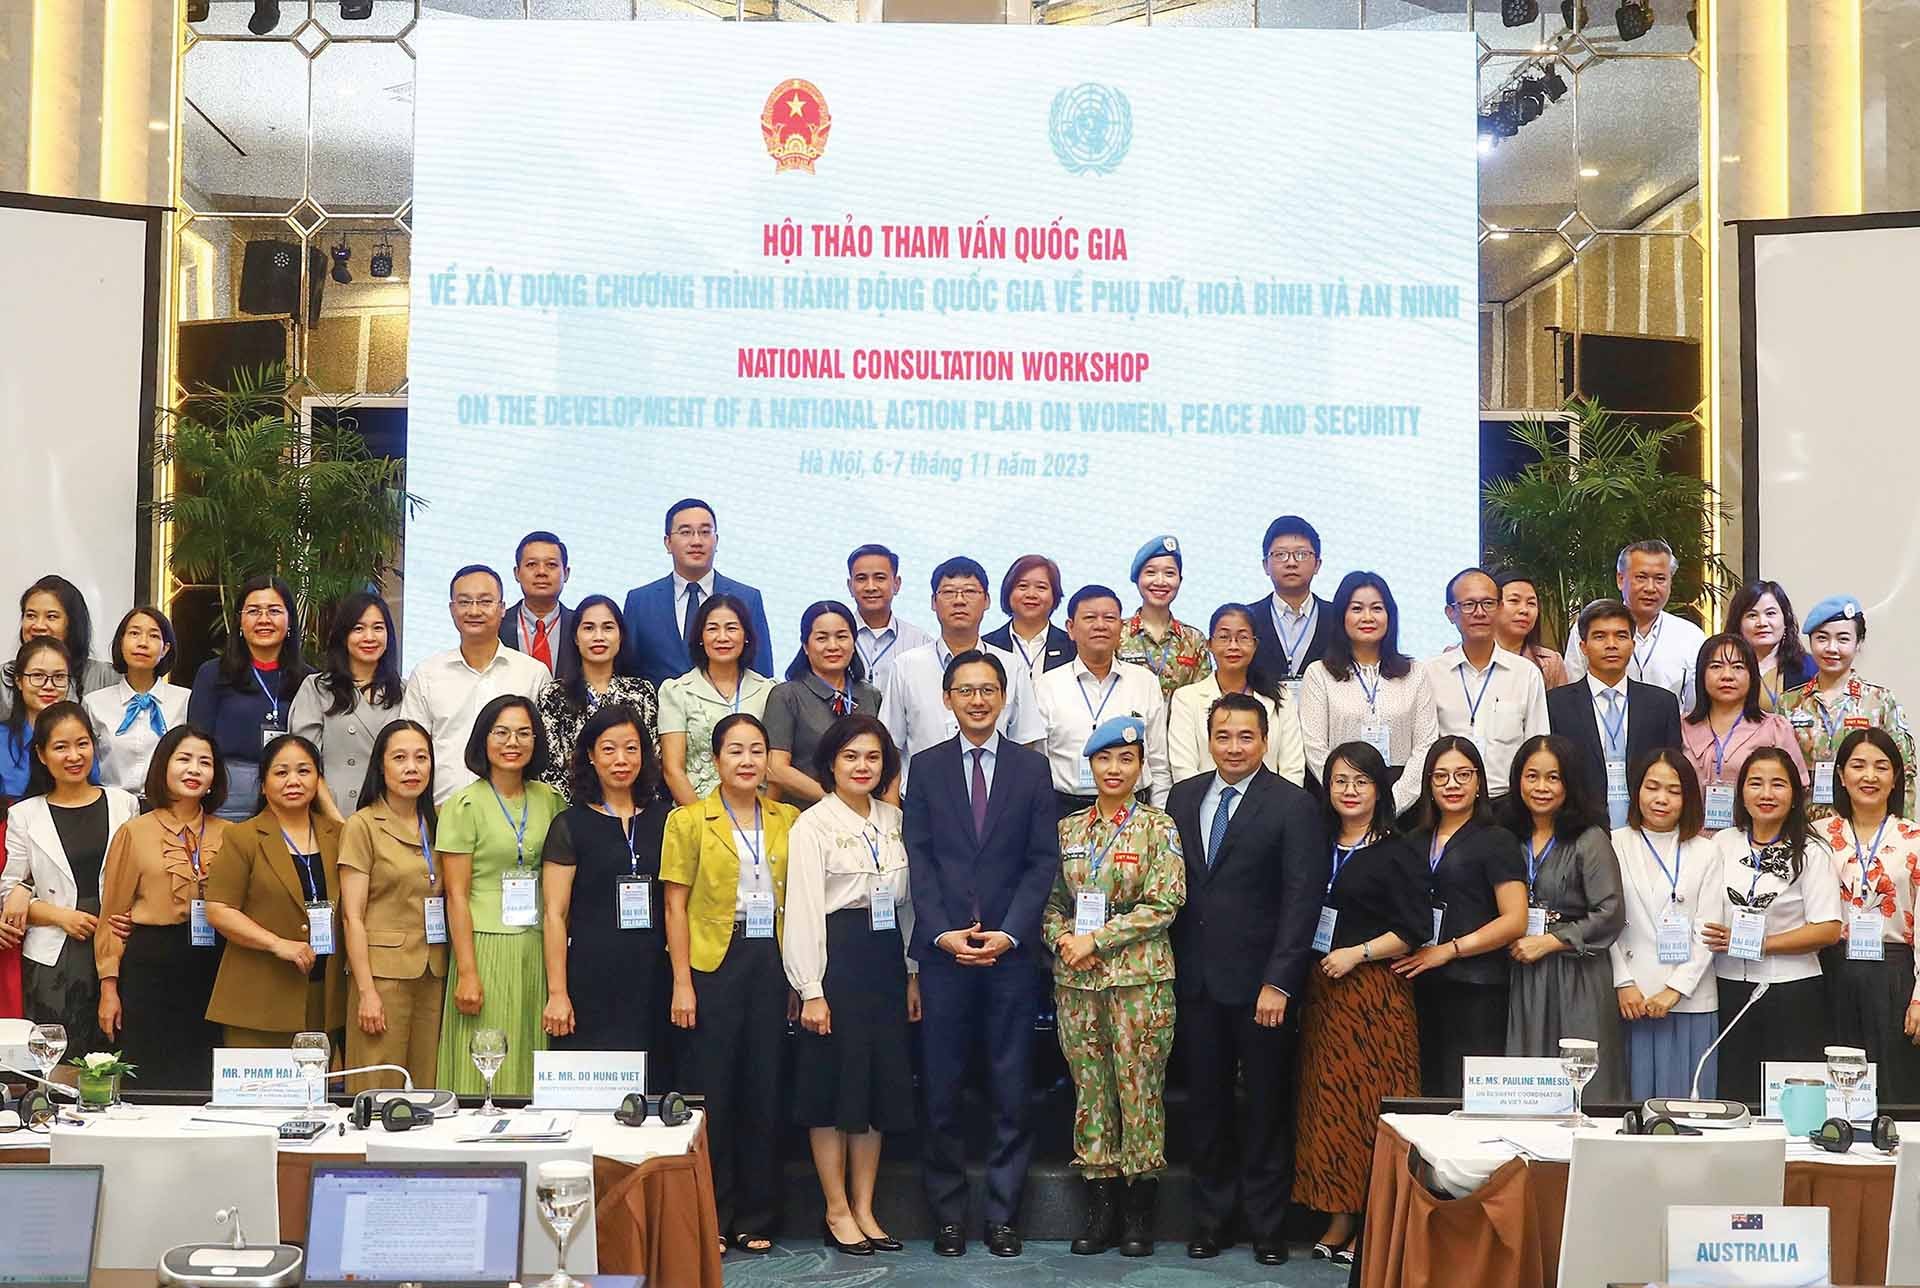 The Ministry of Foreign Affairs and UN Women jointly organized a national consultation workshop on developing a national action plan on women, peace and security in Hanoi on November 6, 11. (Source: VNA)